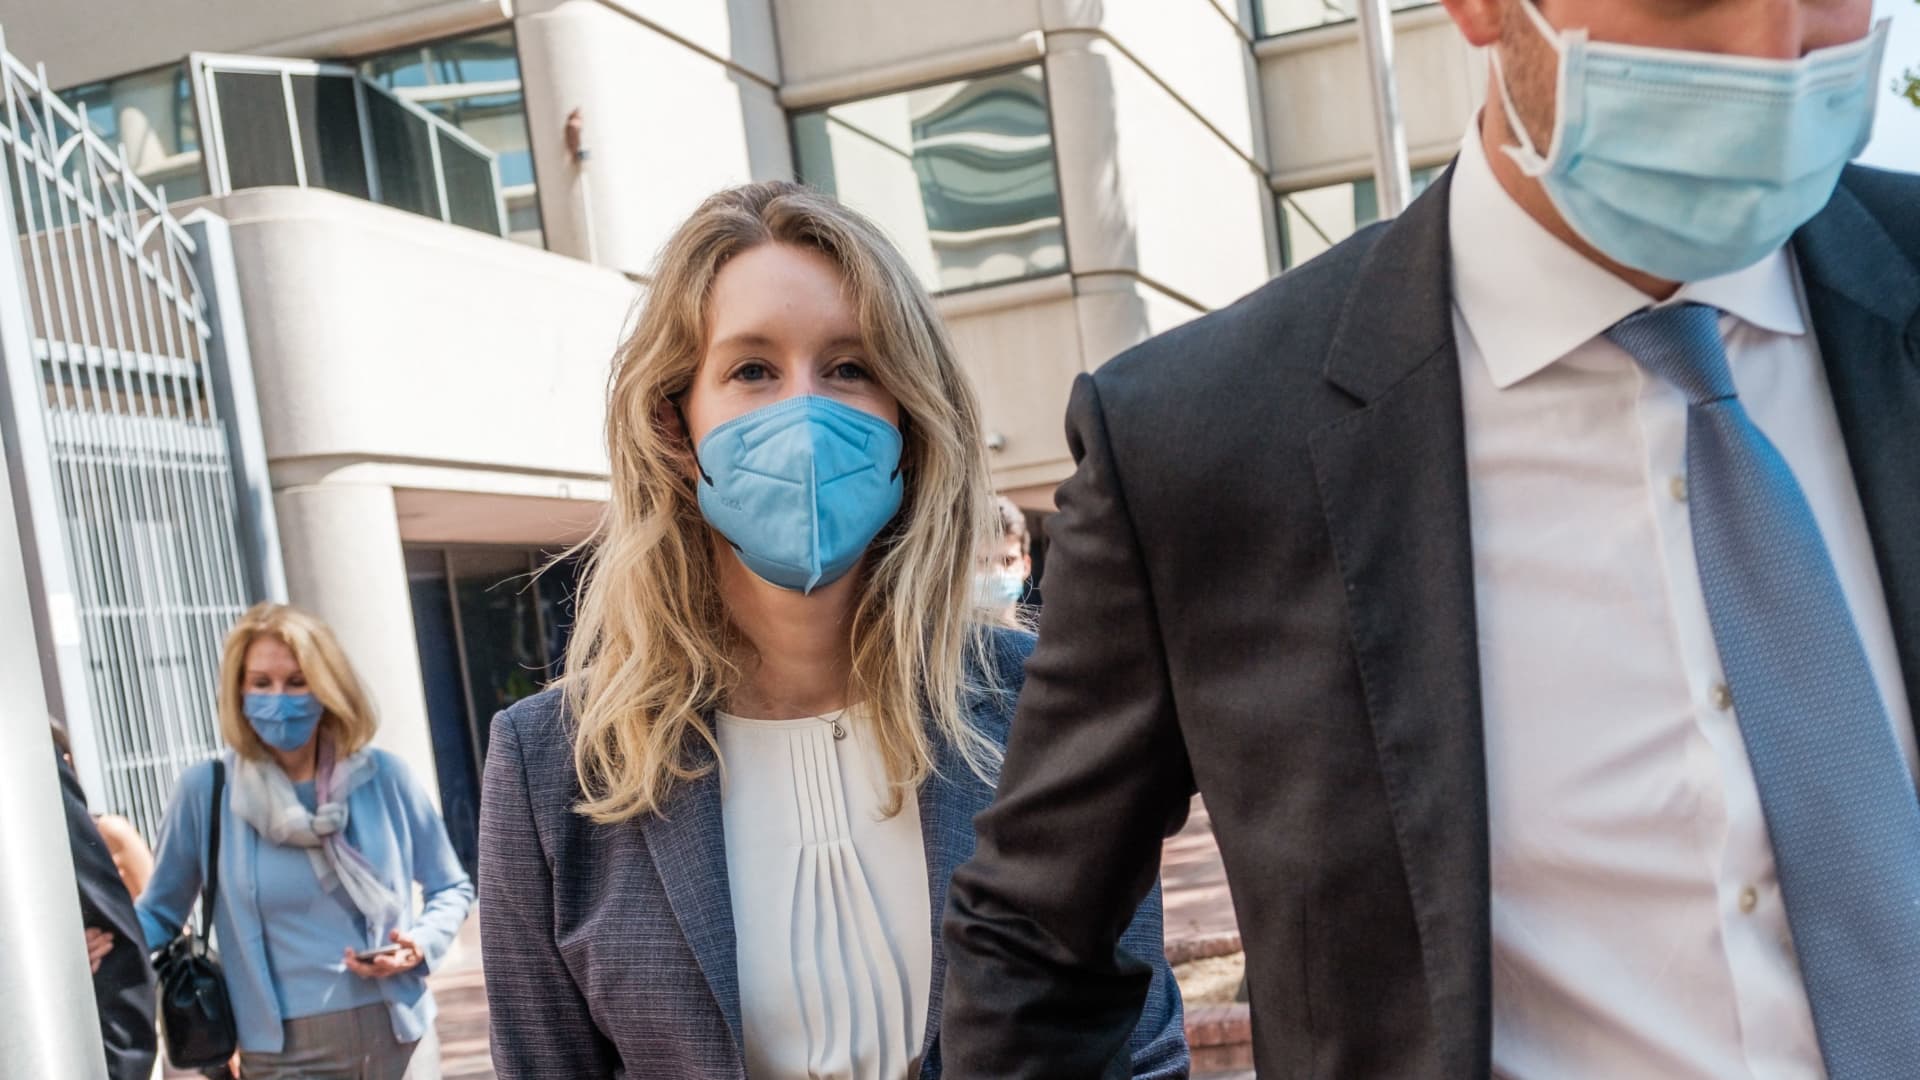 Elizabeth Holmes (L), founder and former CEO of Theranos, leaves the courthouse with her husband Billy Evans after the first day of her fraud trial in San Jose on Sept. 8, 2021.